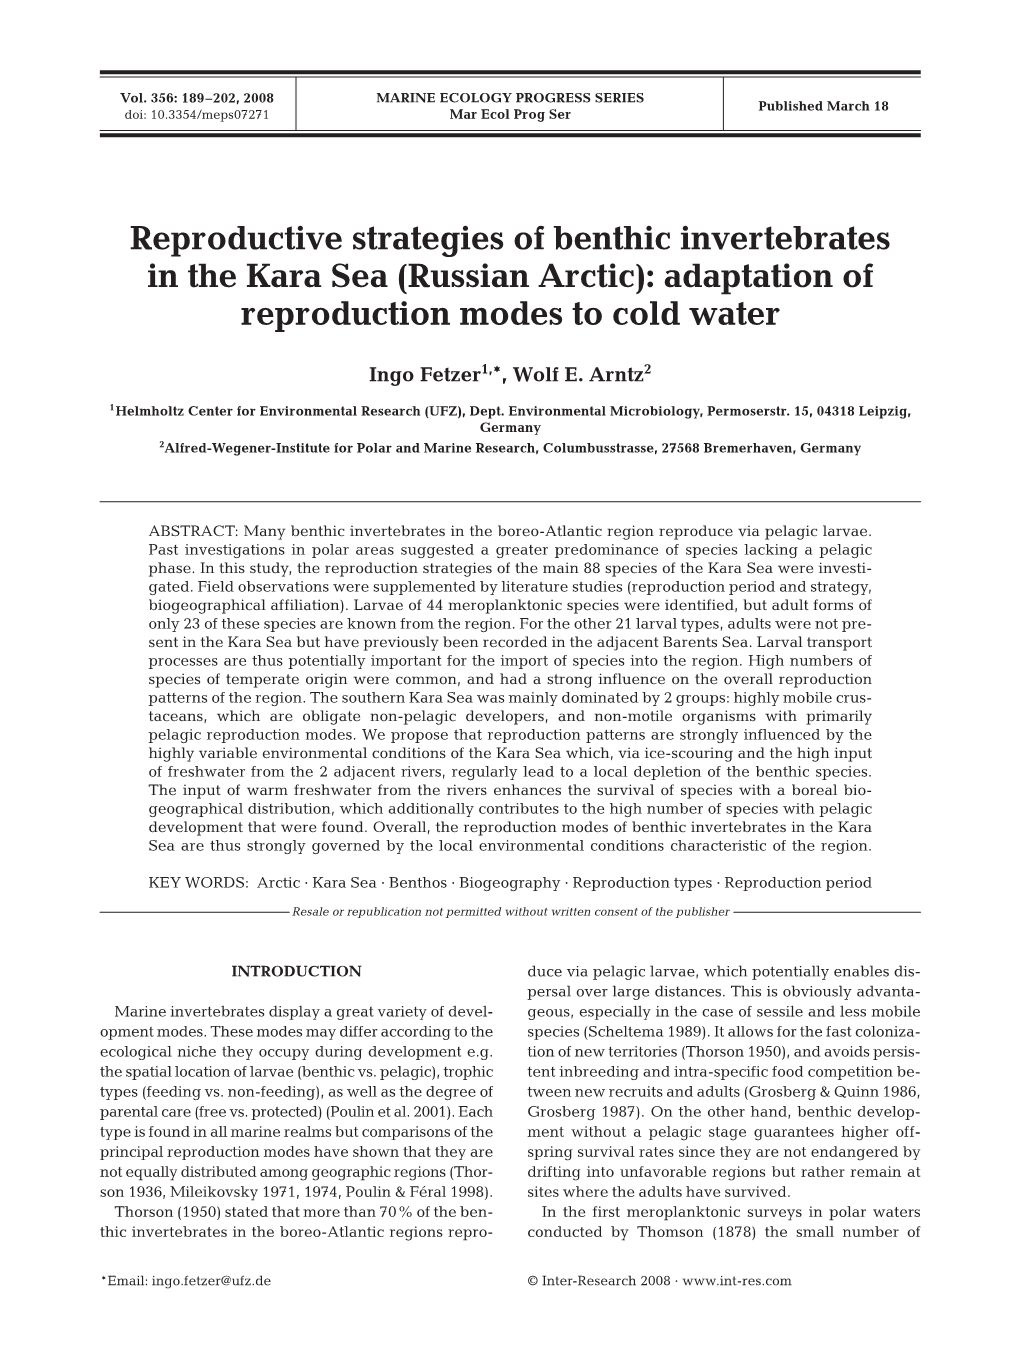 Reproductive Strategies of Benthic Invertebrates in the Kara Sea (Russian Arctic): Adaptation of Reproduction Modes to Cold Water